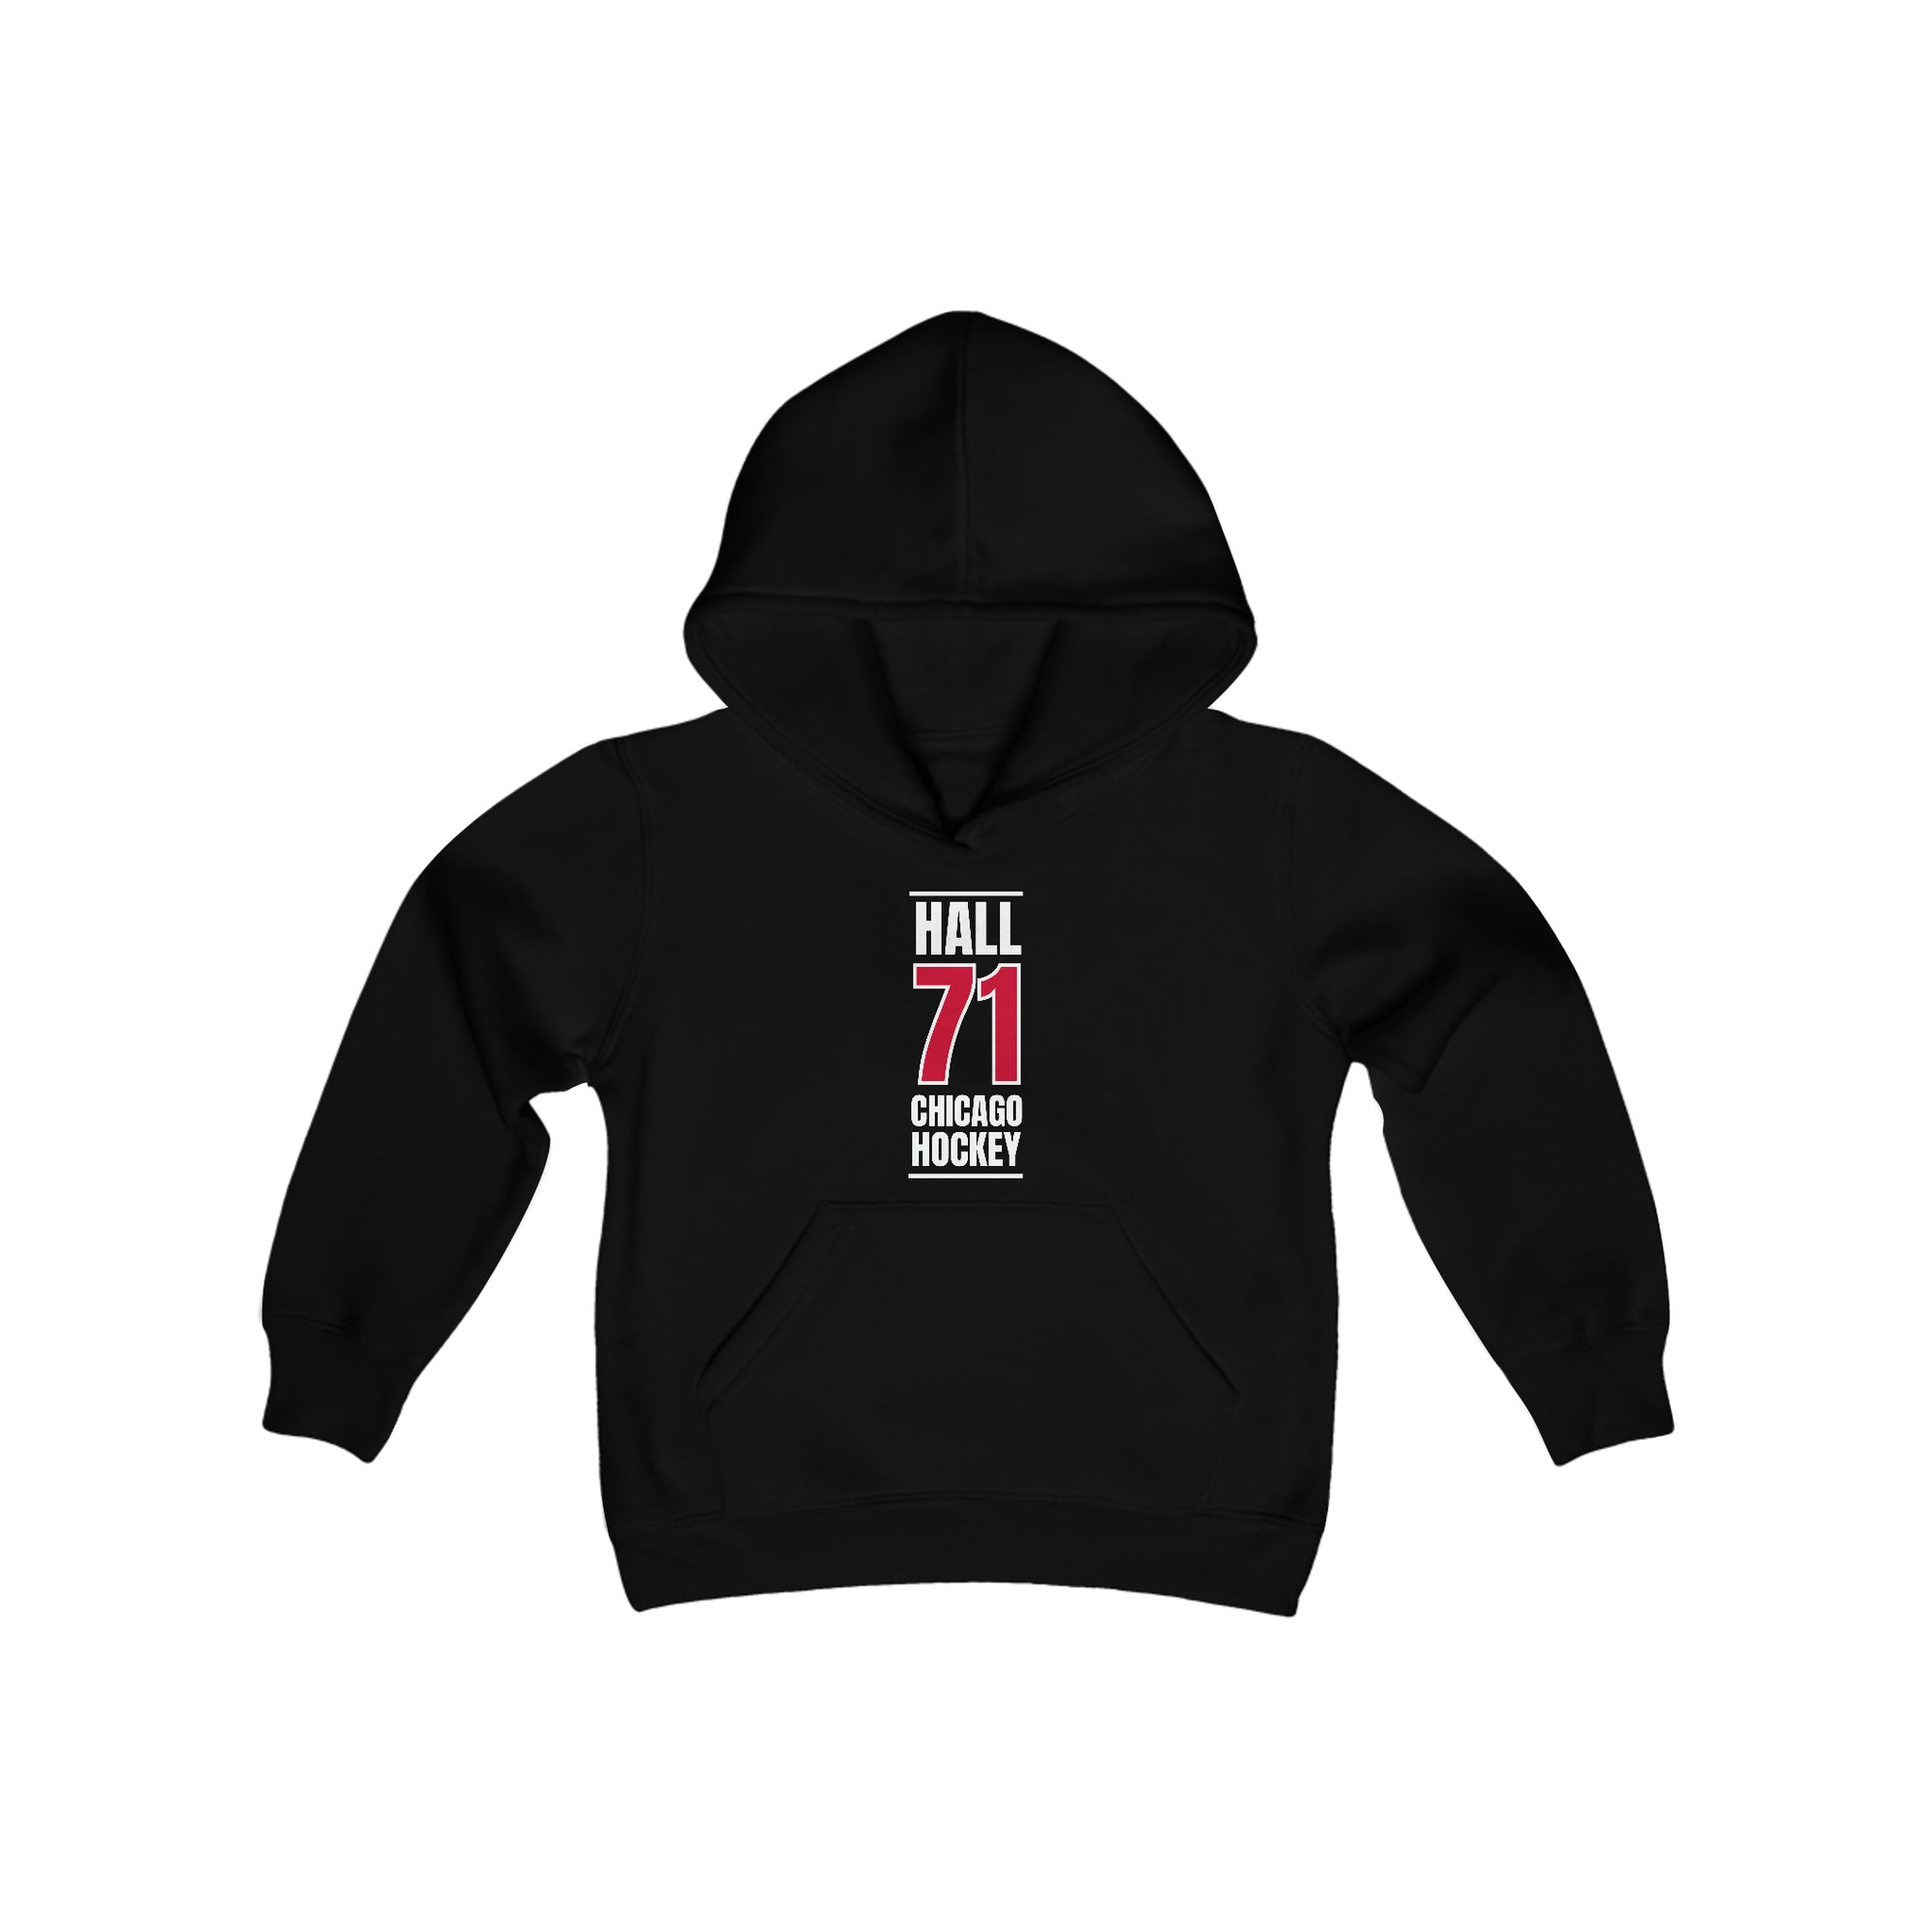 Hall 71 Chicago Hockey Red Vertical Design Youth Hooded Sweatshirt